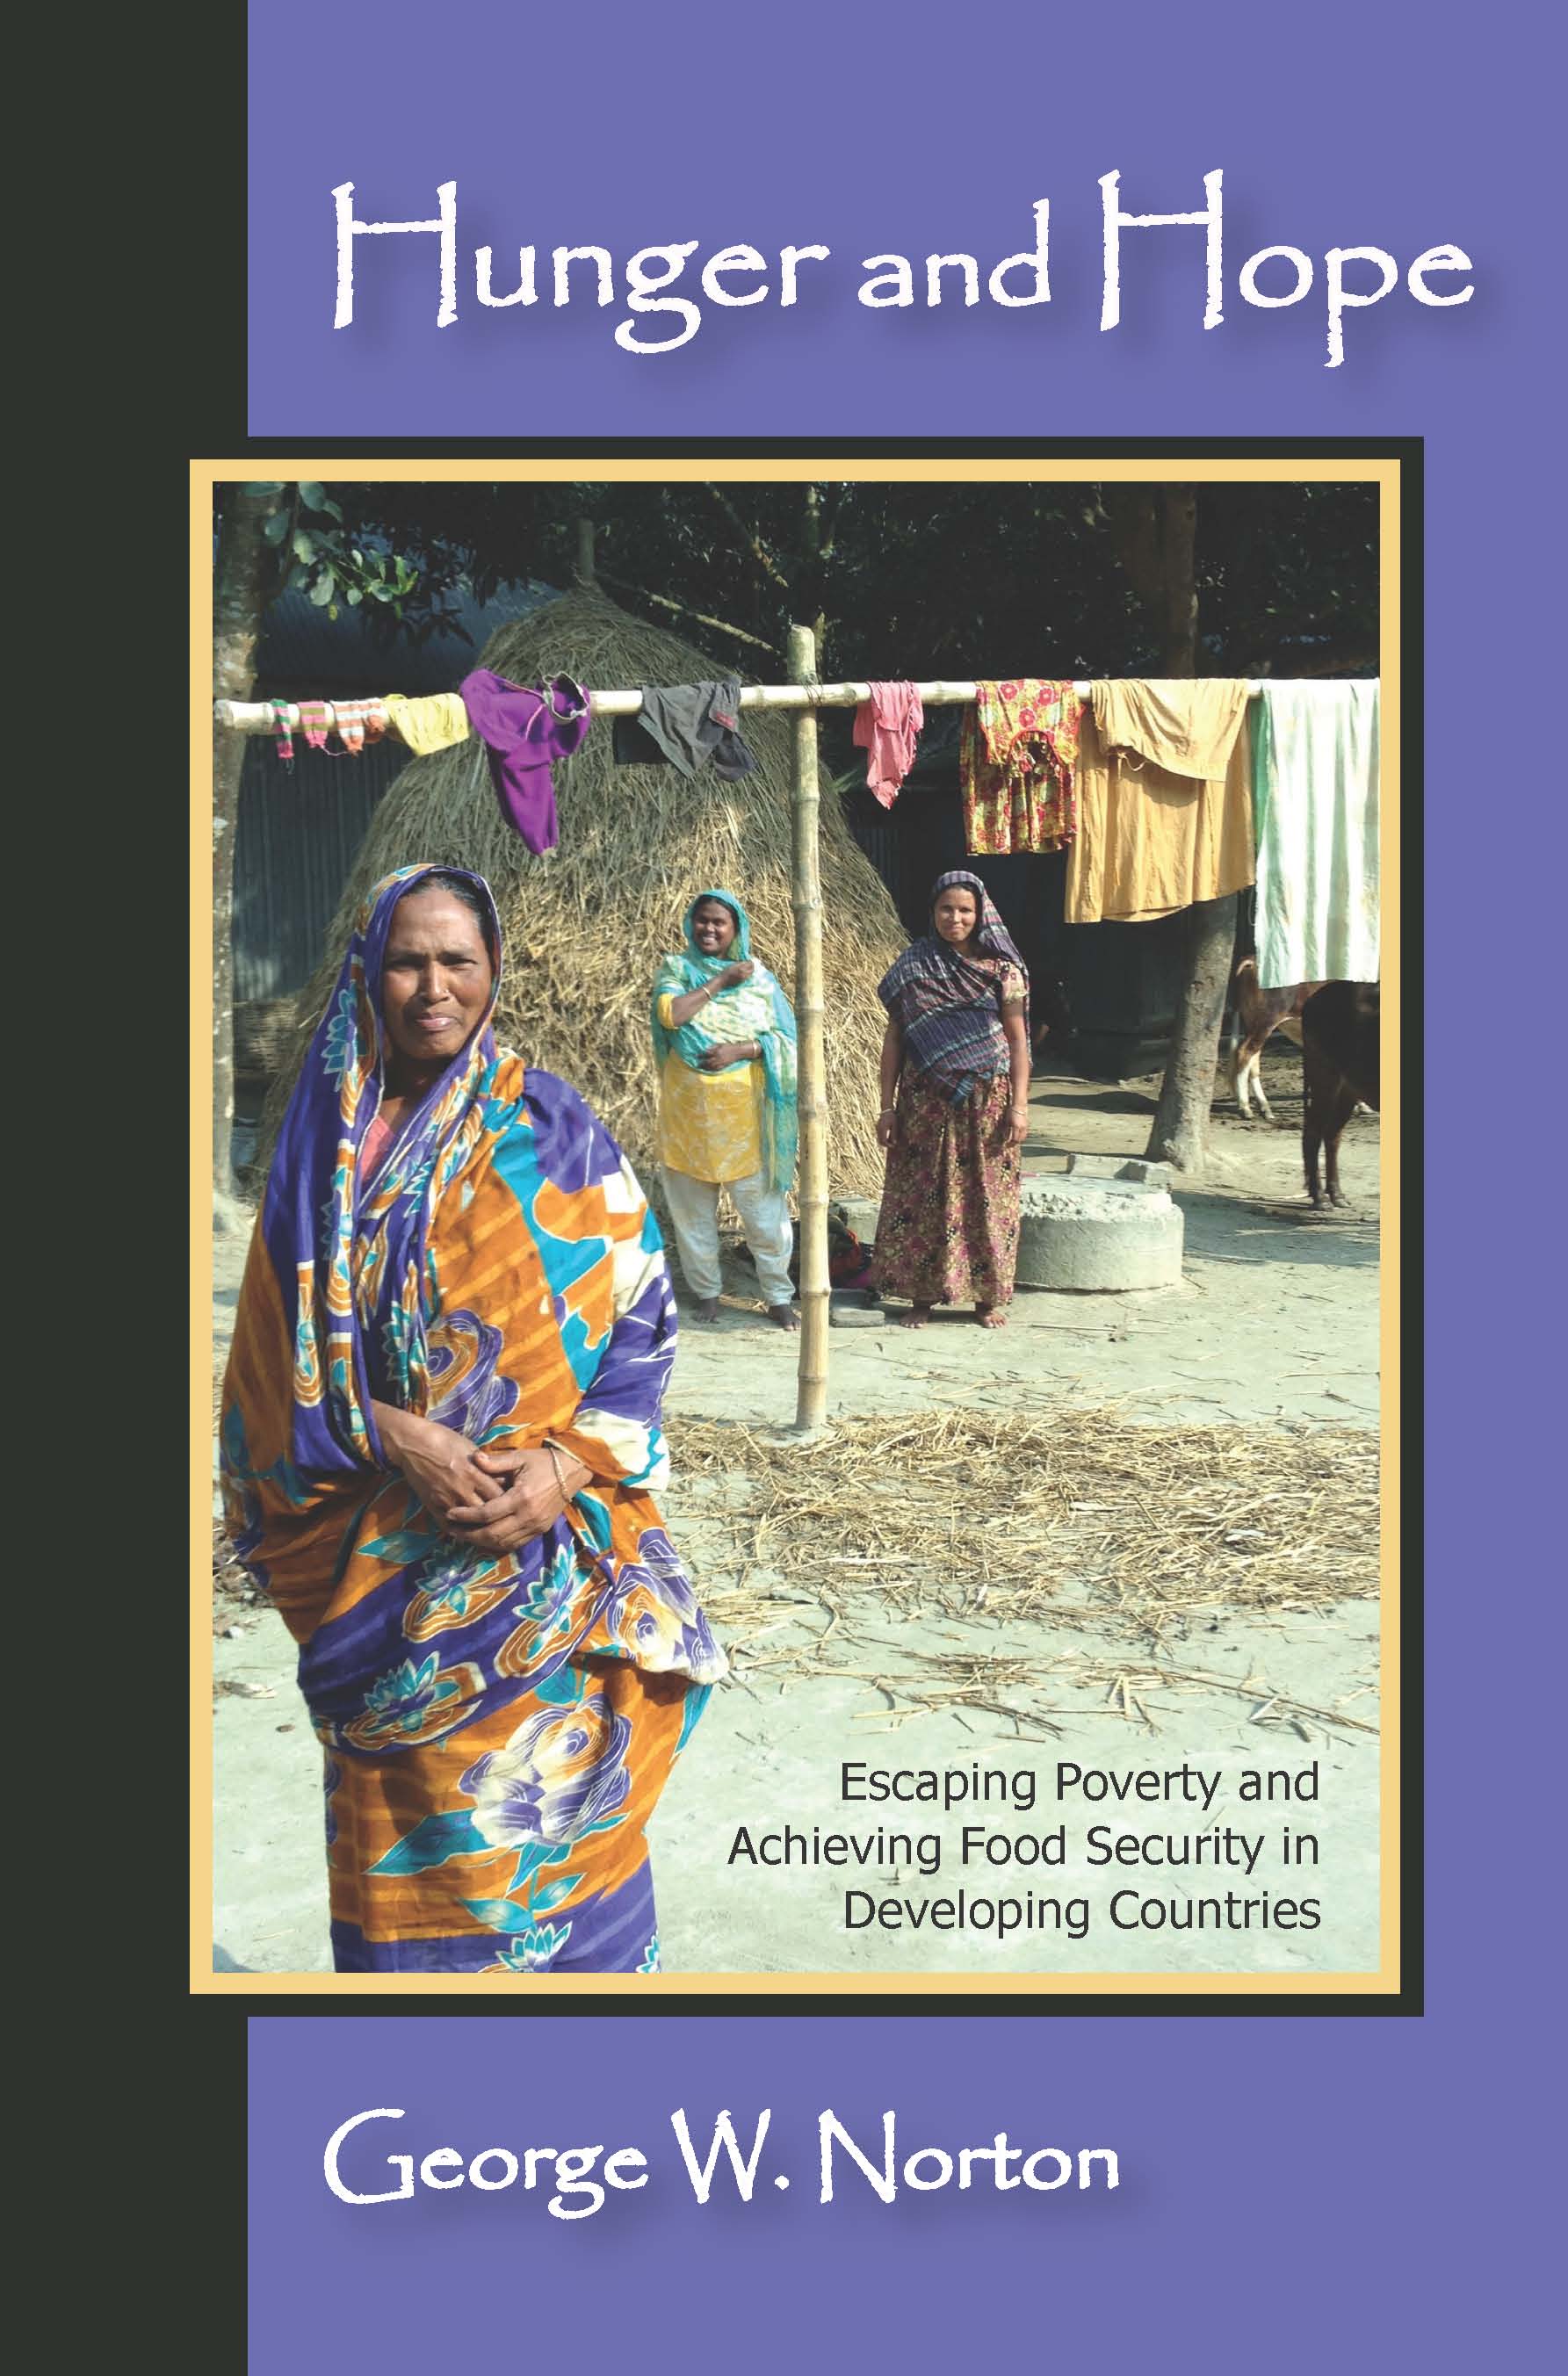 Hunger and Hope: Escaping Poverty and Achieving Food Security in Developing Countries by George W. Norton